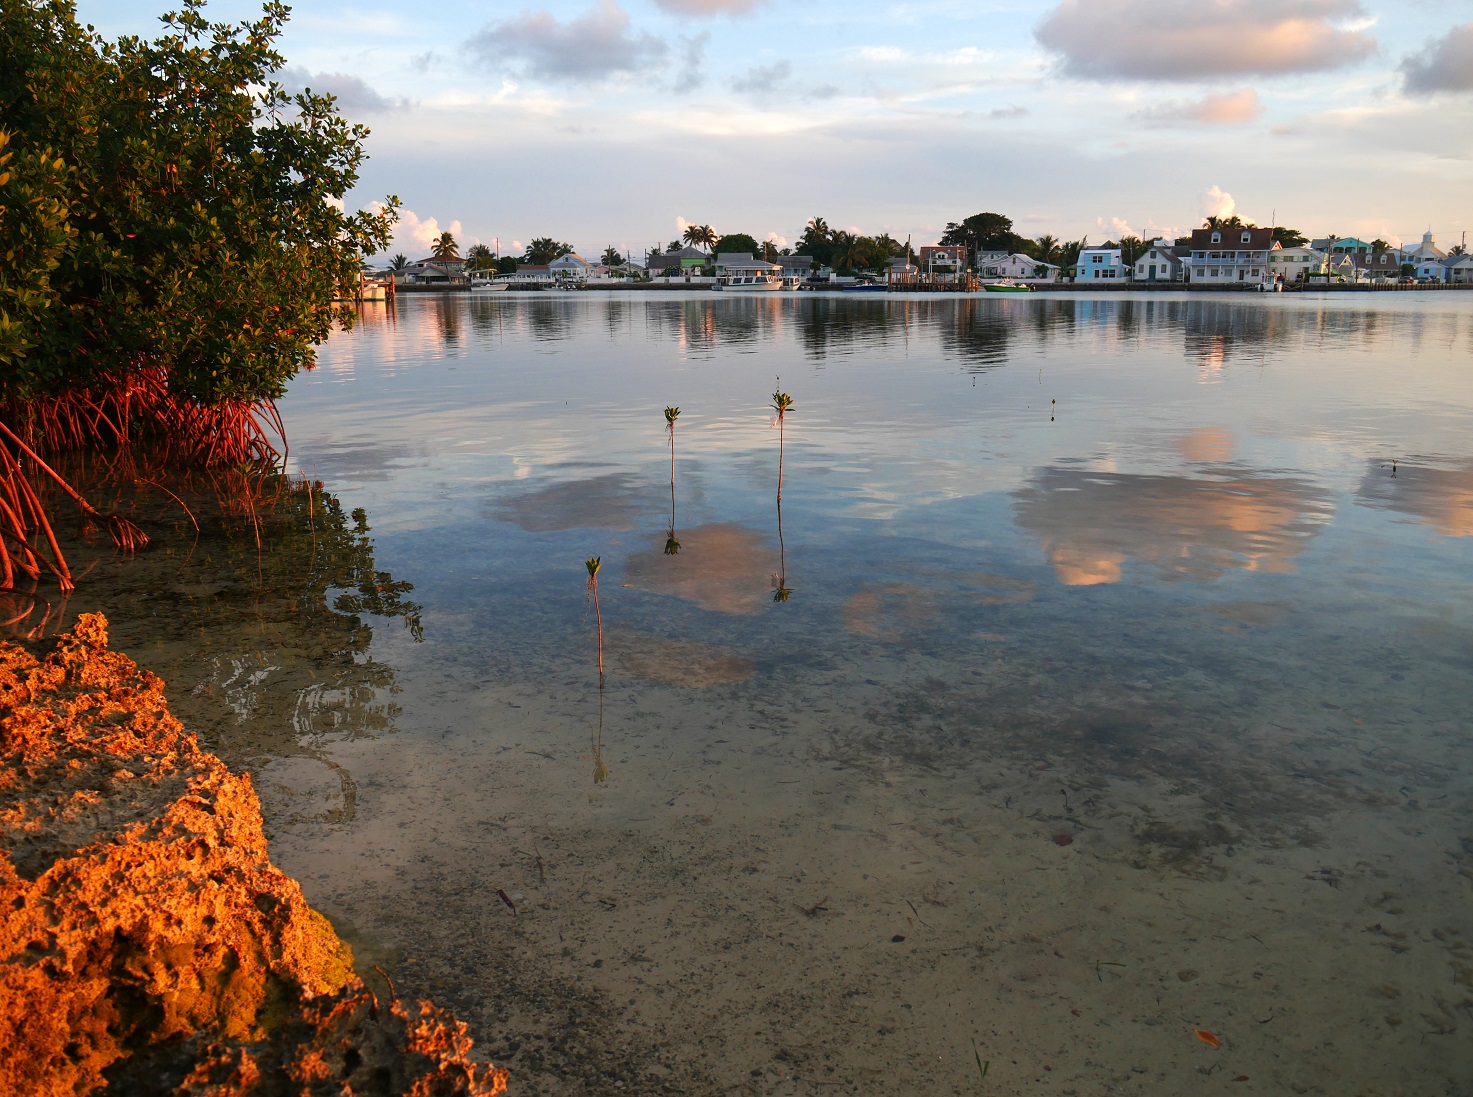 New Plymouth at Sunset - Green Turtle Cay, Abaco, Bahamas